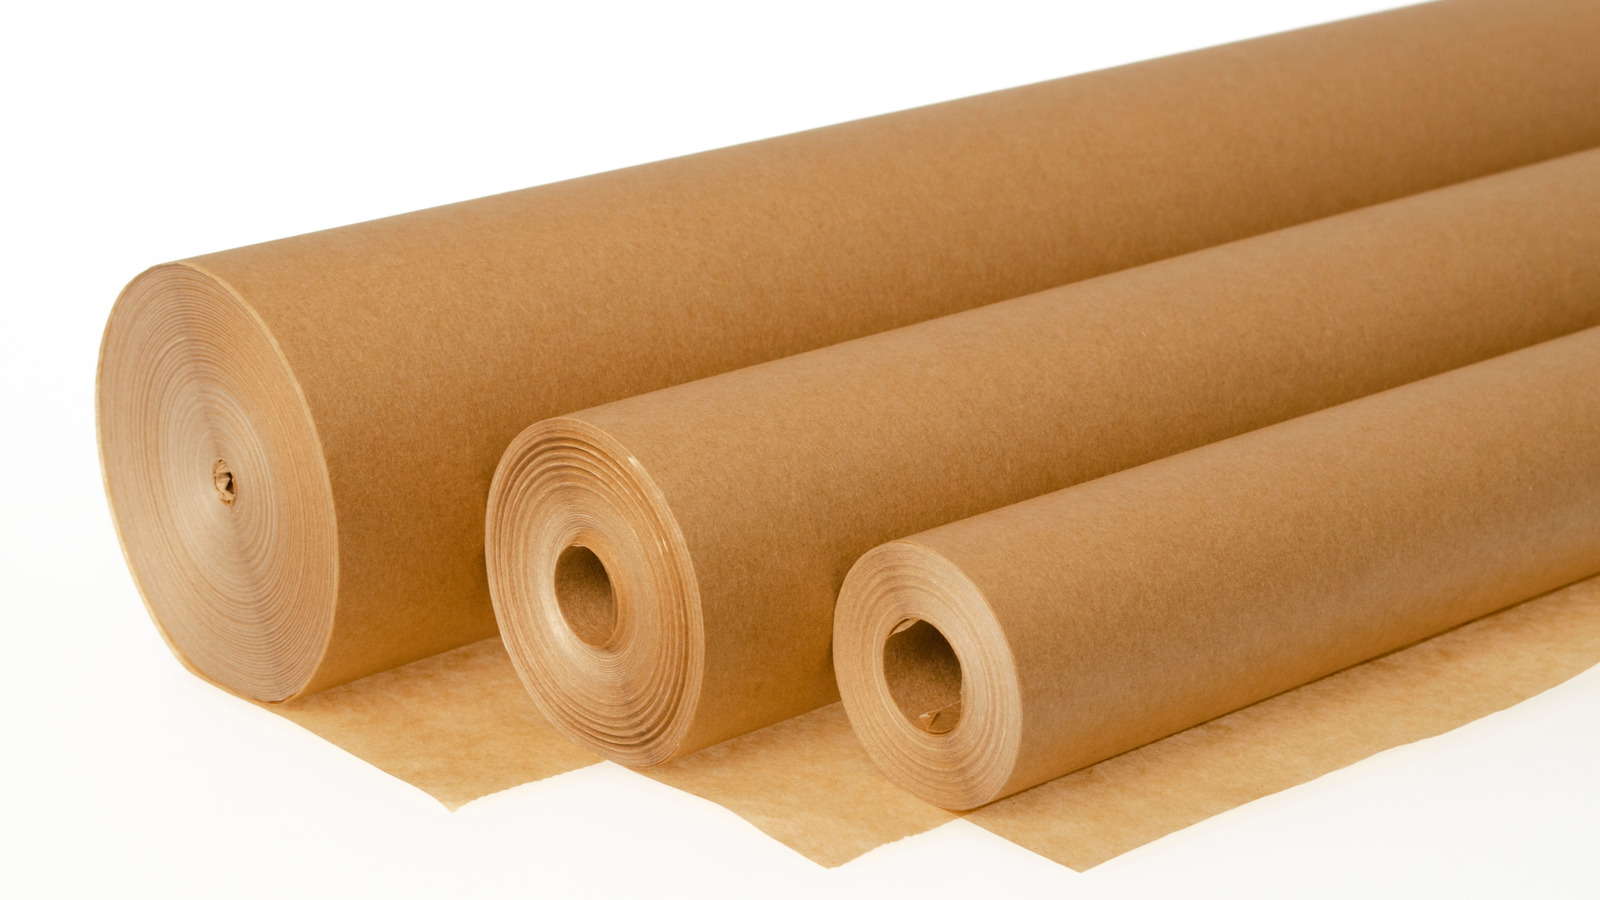 Yes, You Can Reuse Parchment Paper